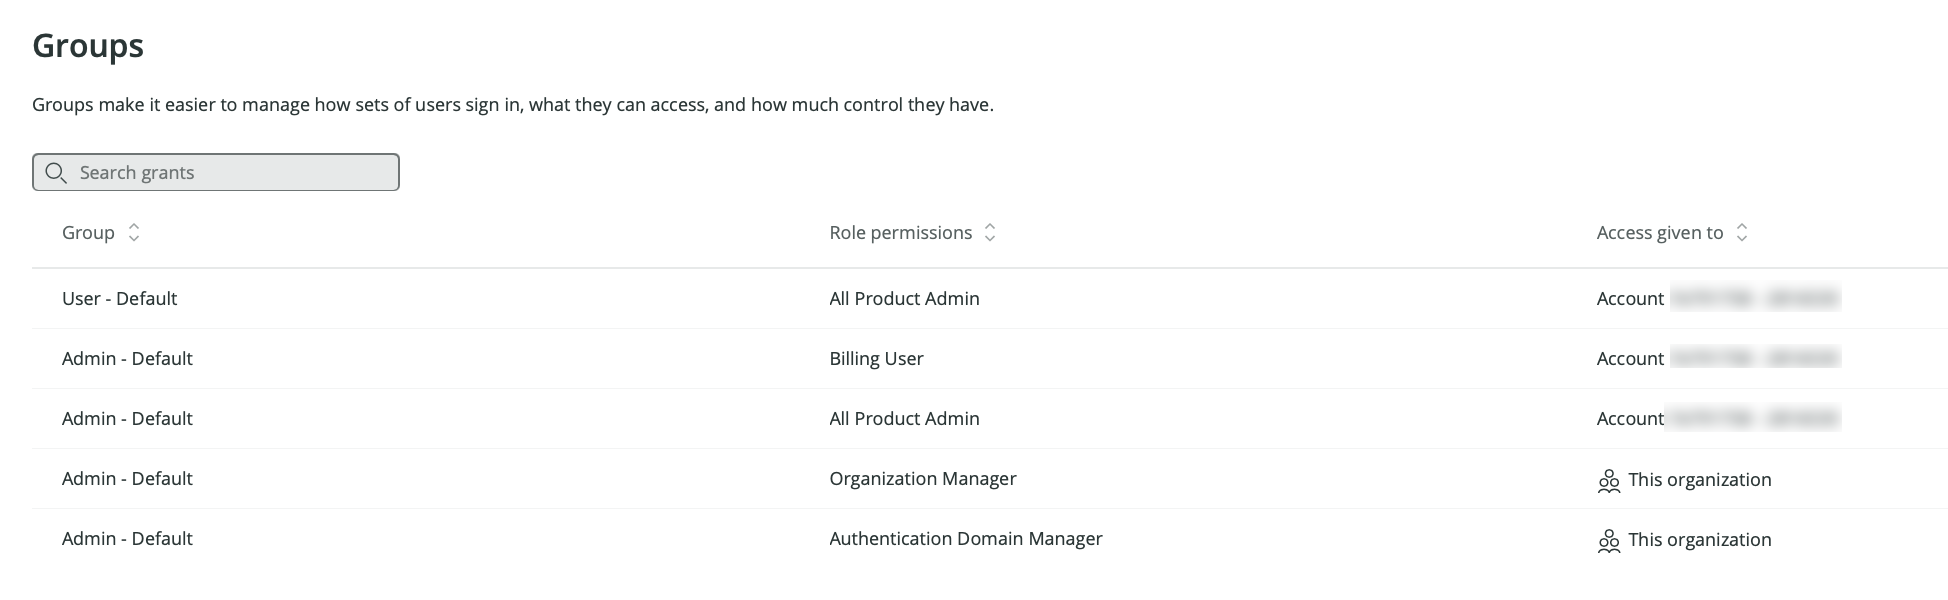 New Relic organization and access UI - default access grants